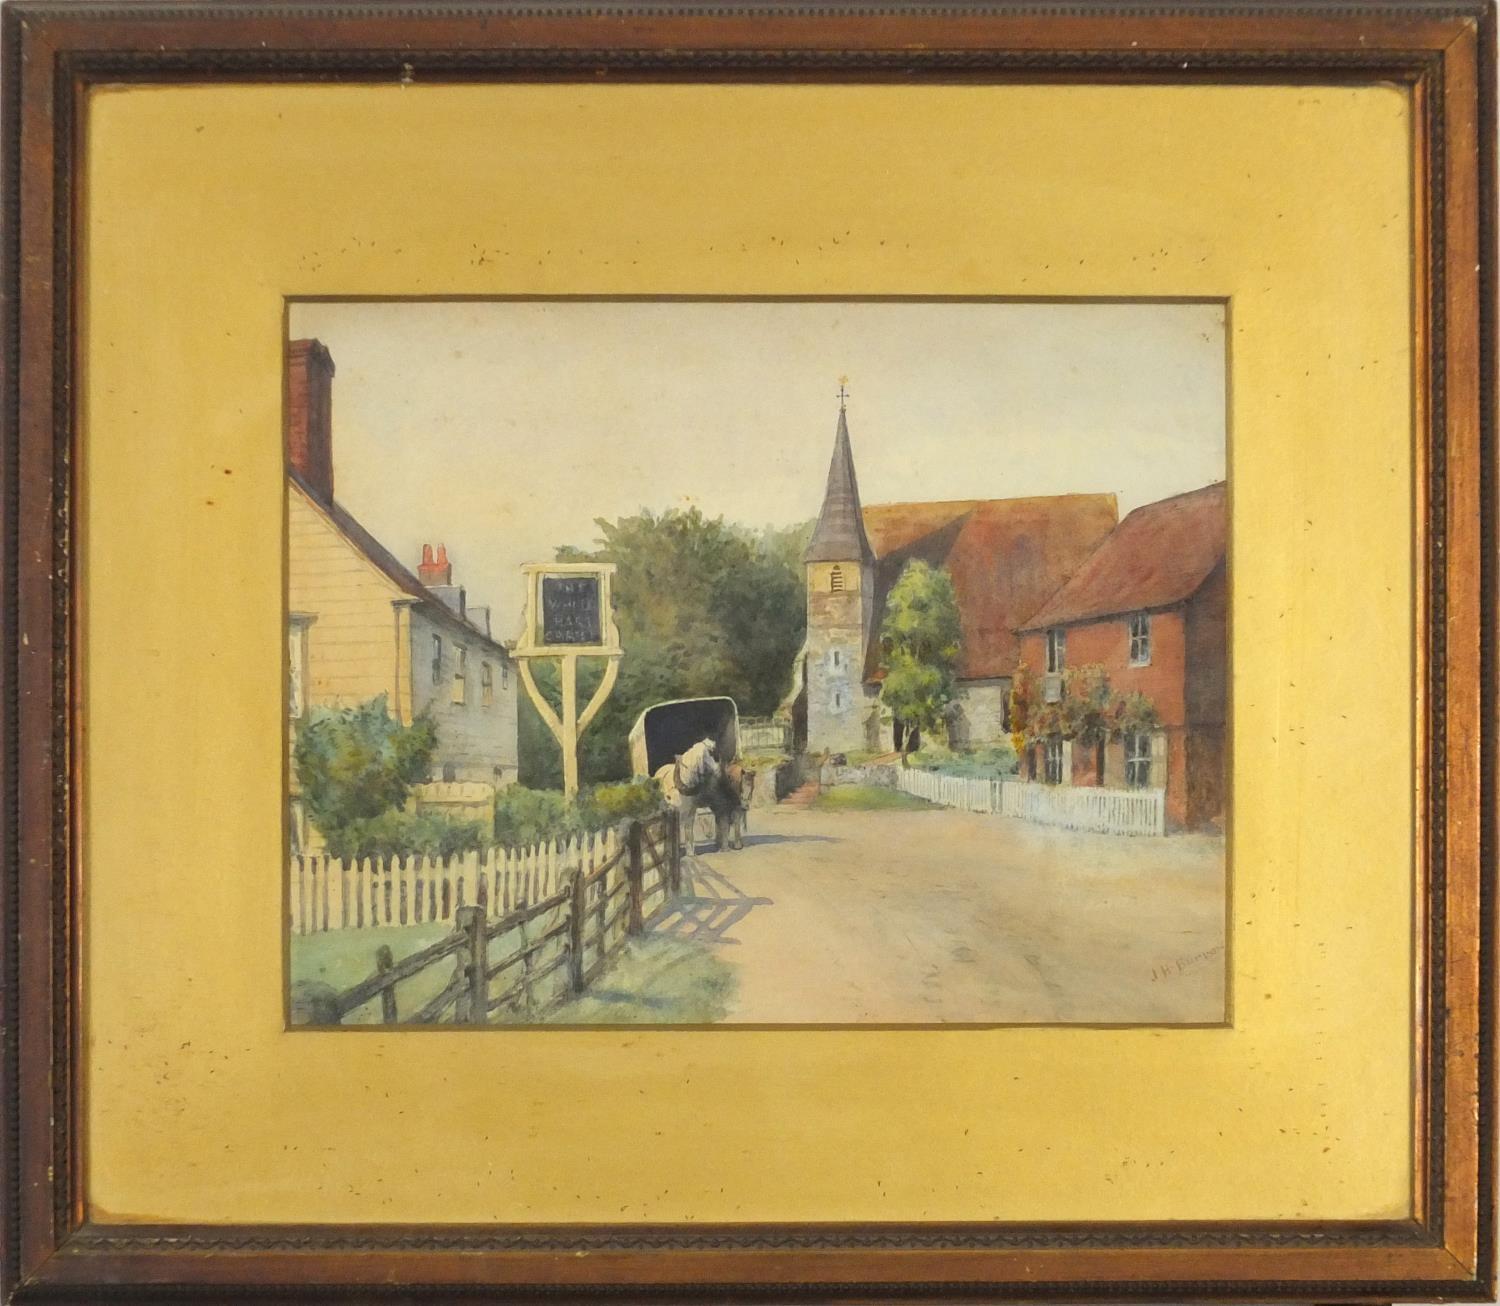 J H Burrow - Street scene with horse drawn cart, watercolour, mounted, framed and glazed, 28cm x - Image 2 of 5